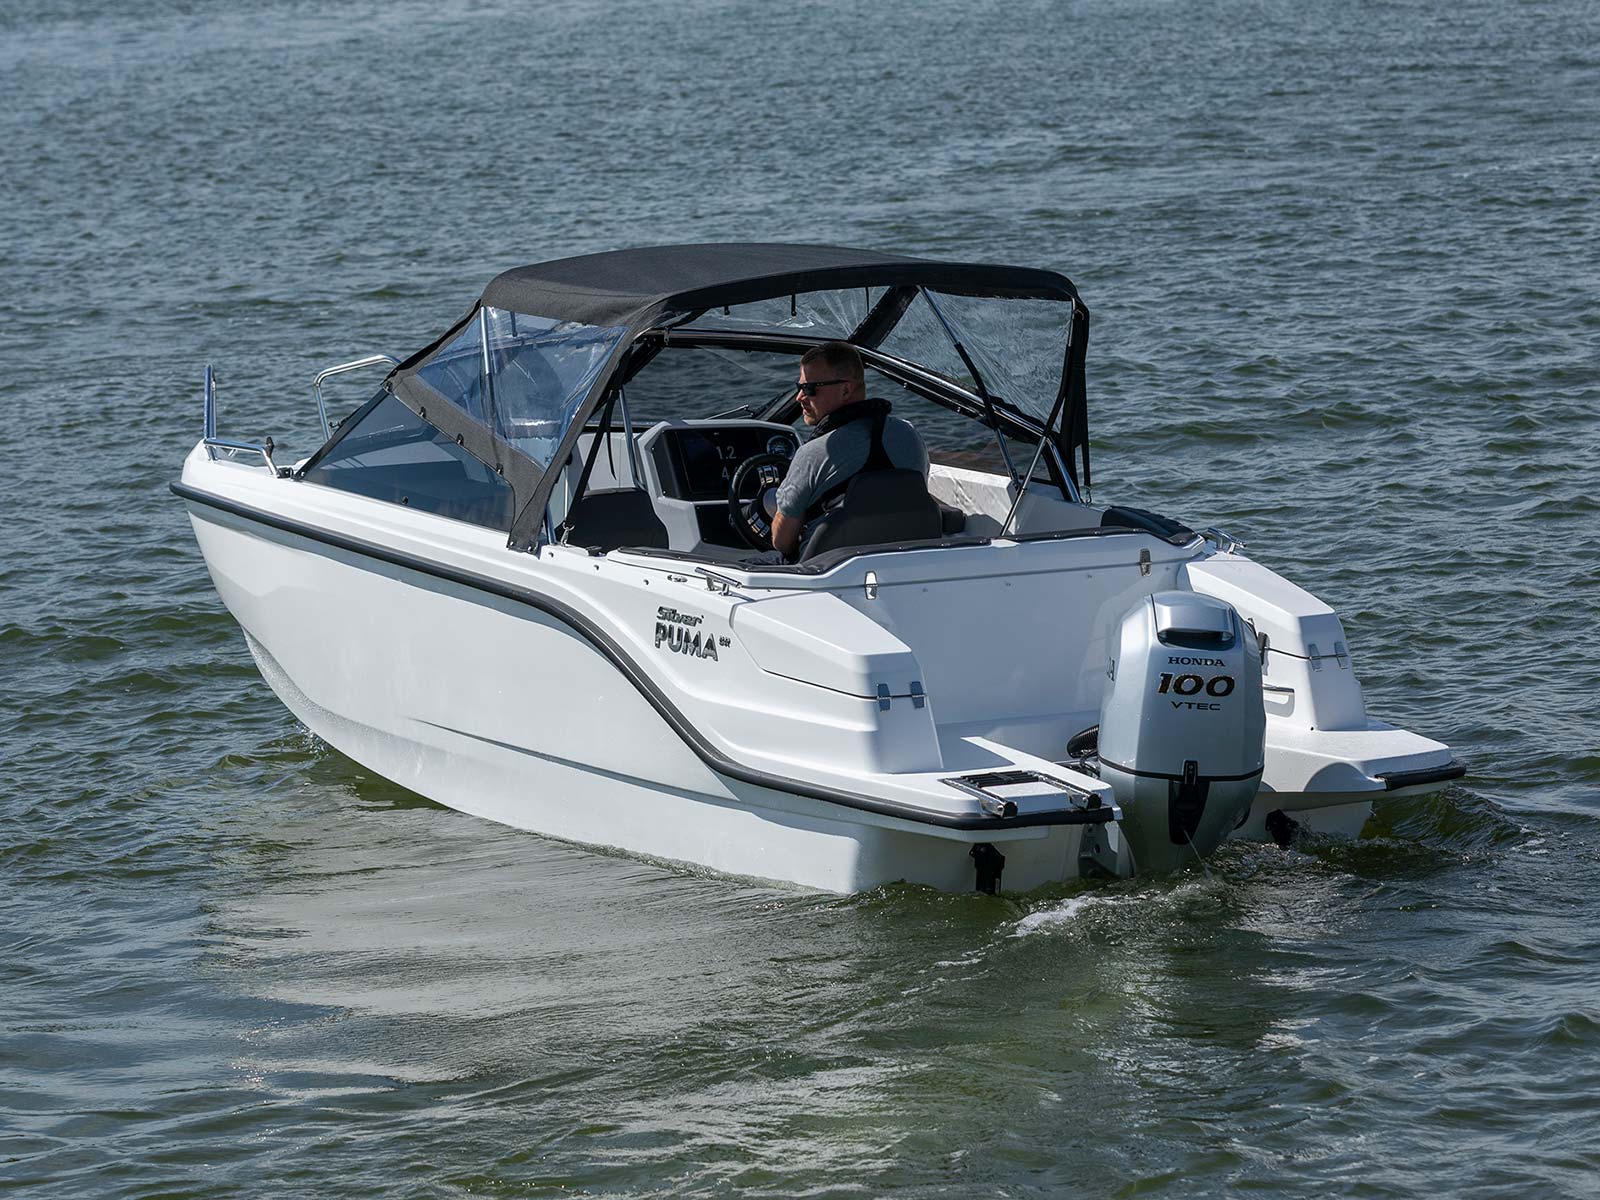 SALE: Silver Puma BRz | Boat Solutions, Utting am Ammersee